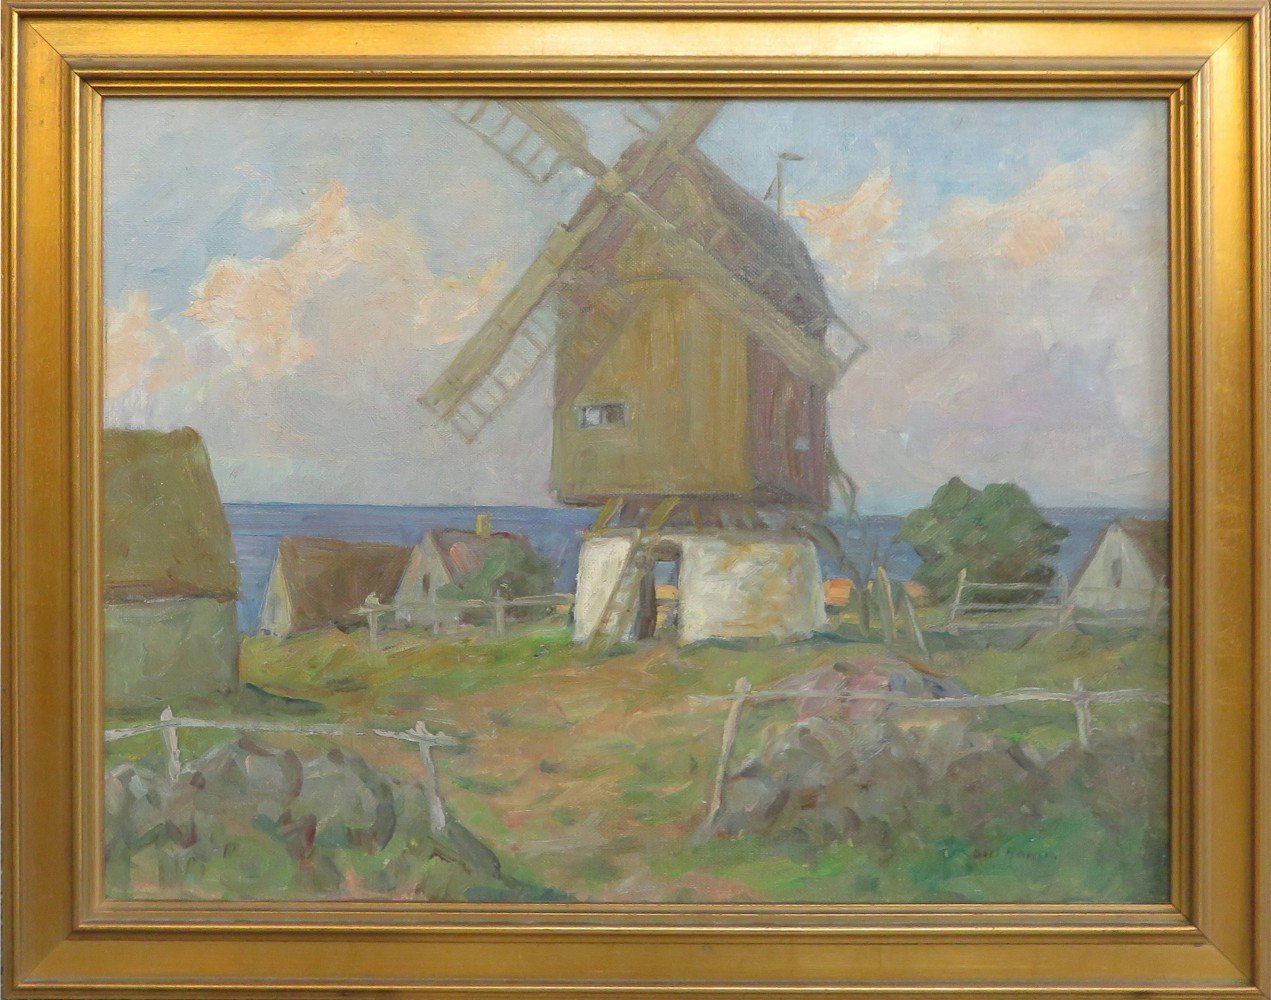 New England landscape with Windmill by Henry Ward Ranger